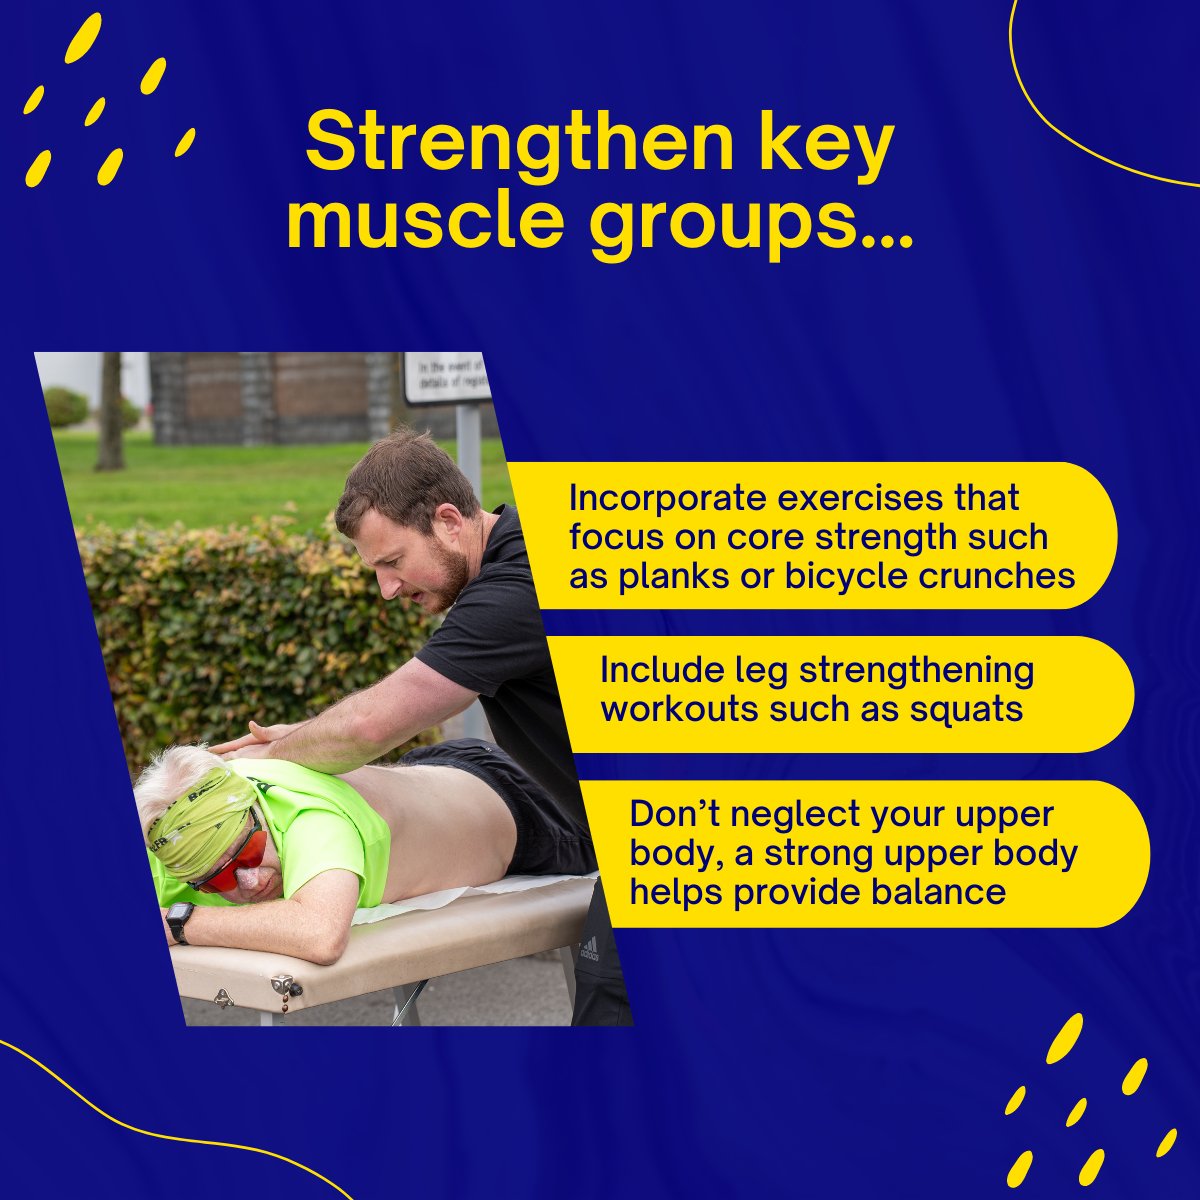 Following on from our running tips in February, we thought we’d share a follow up of the “strengthen key muscle groups” tip; 🧘‍♀️ focus on core strength 🦵 include leg strengthening workouts 💪 don’t neglect your upper body #stirling10K #runningtips